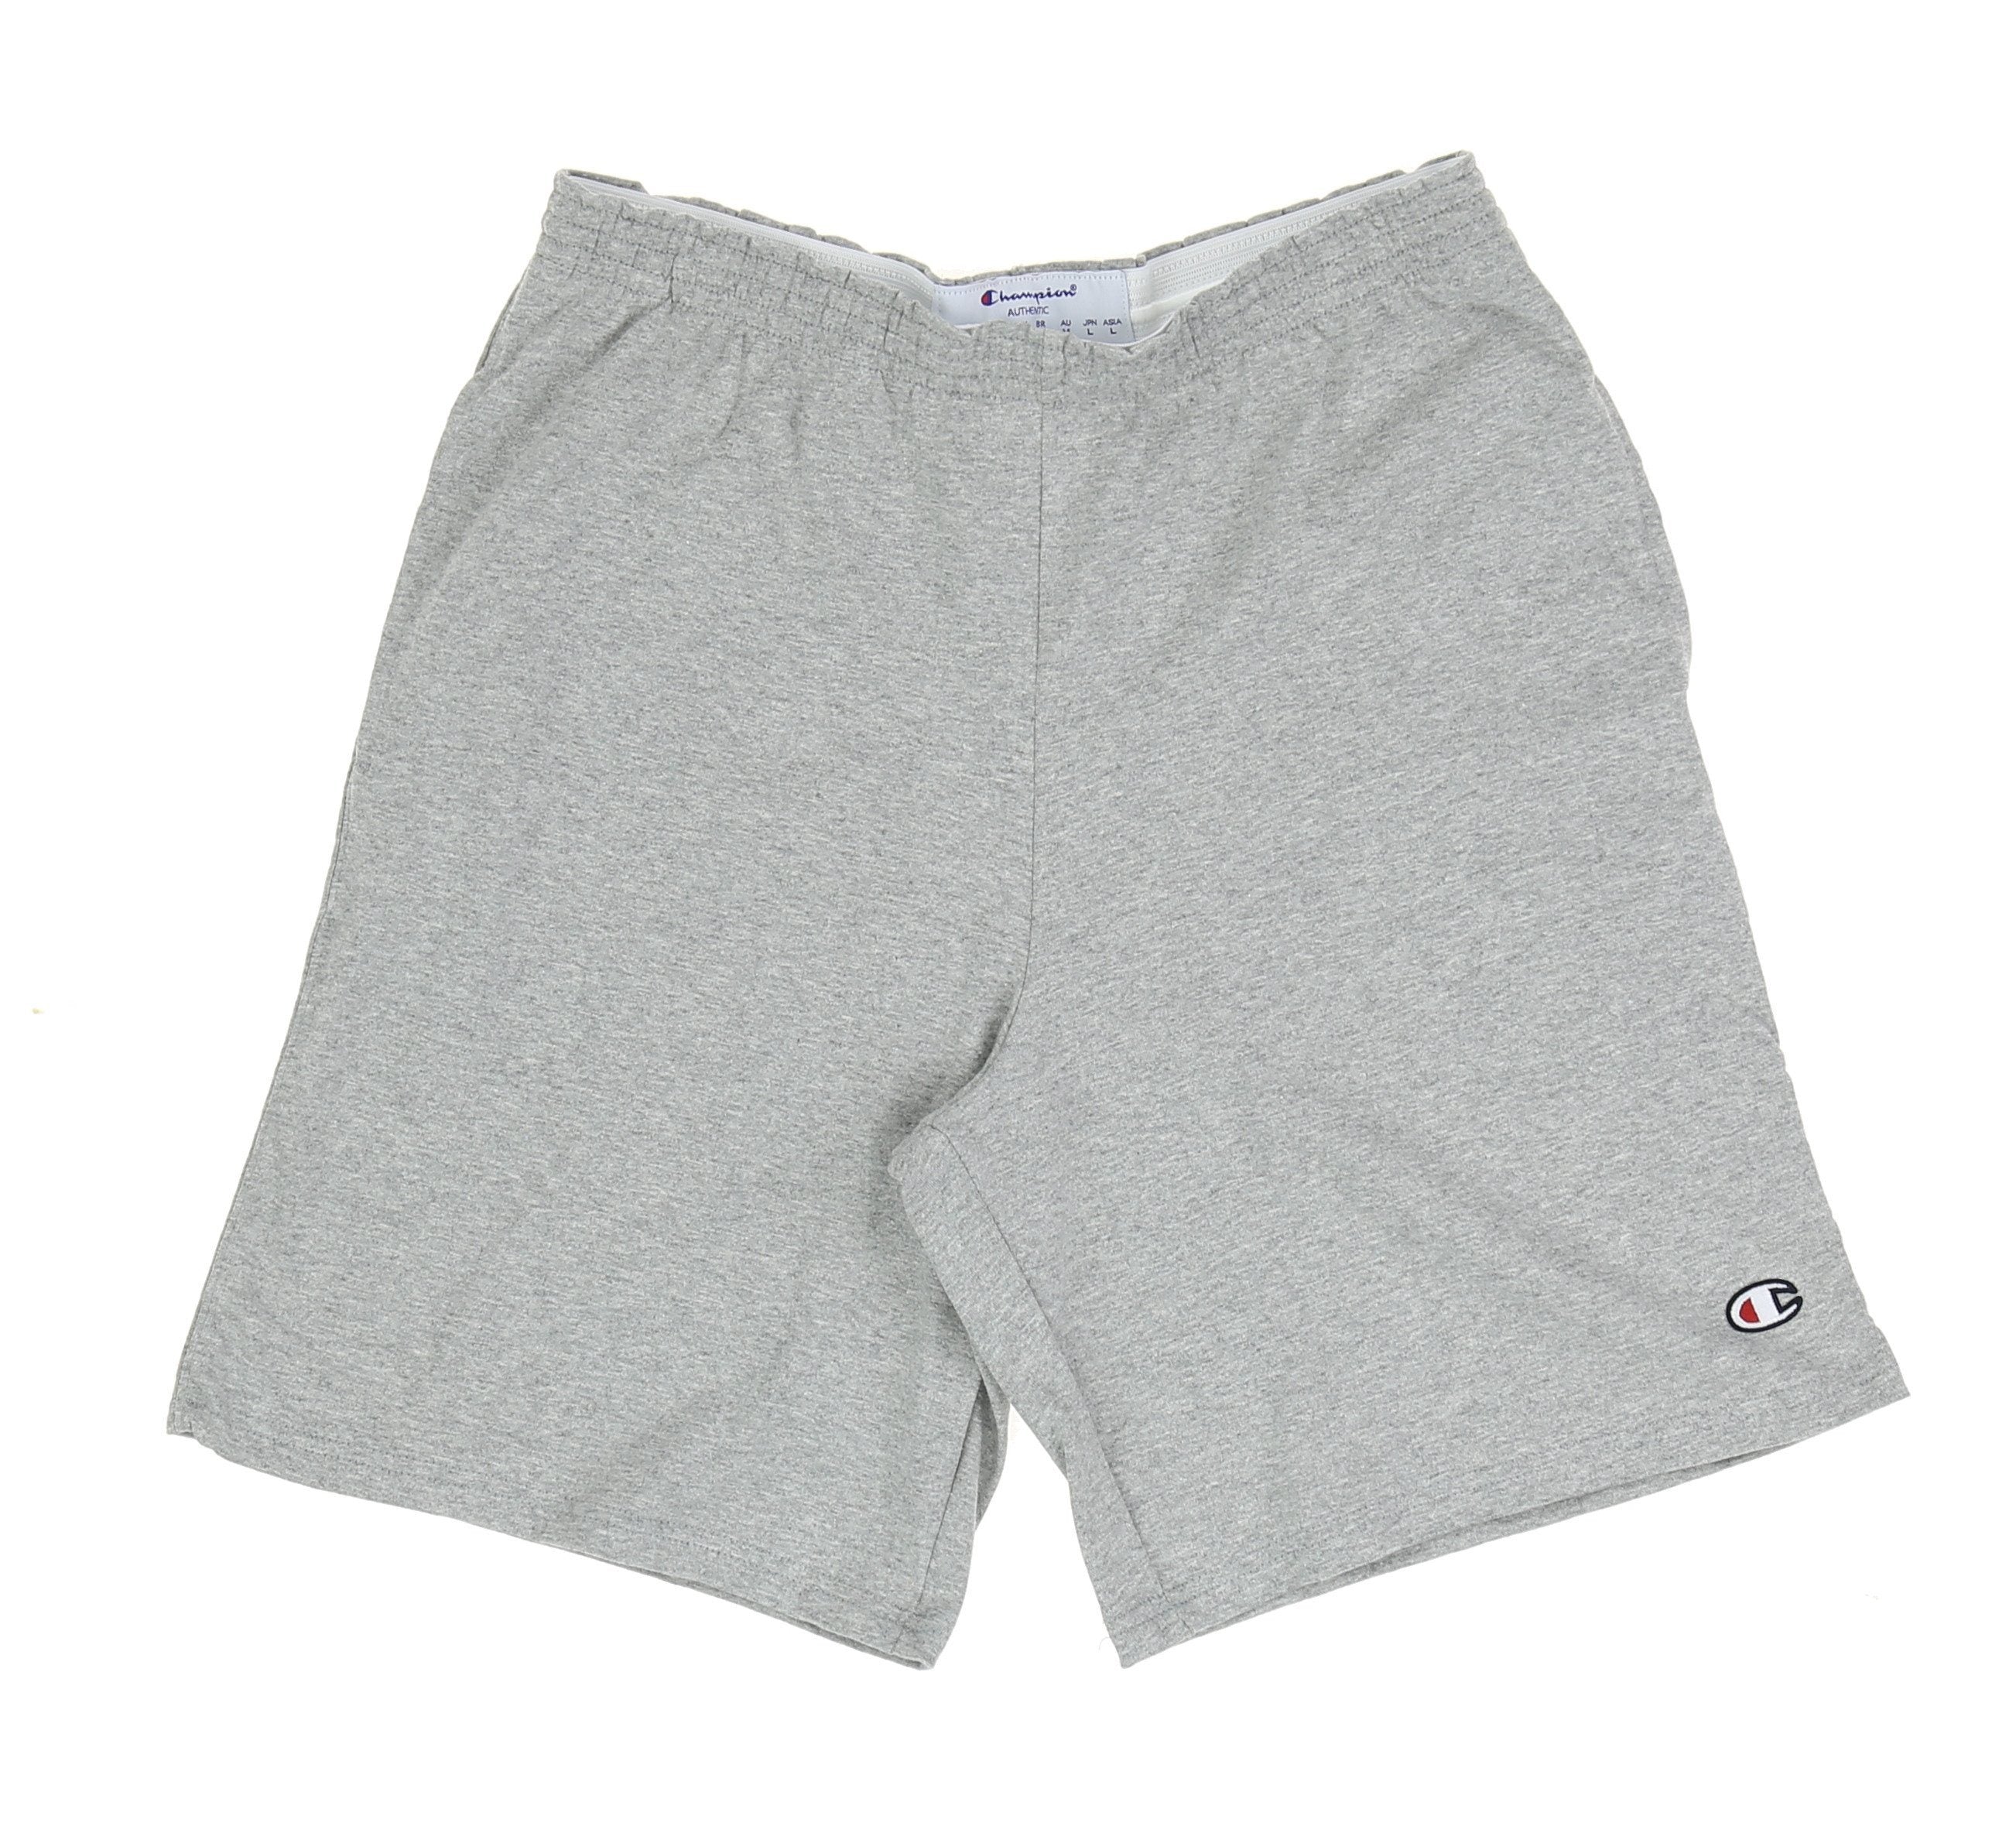 CHAMPION RUGBY SHORTS – SHOPATKINGS